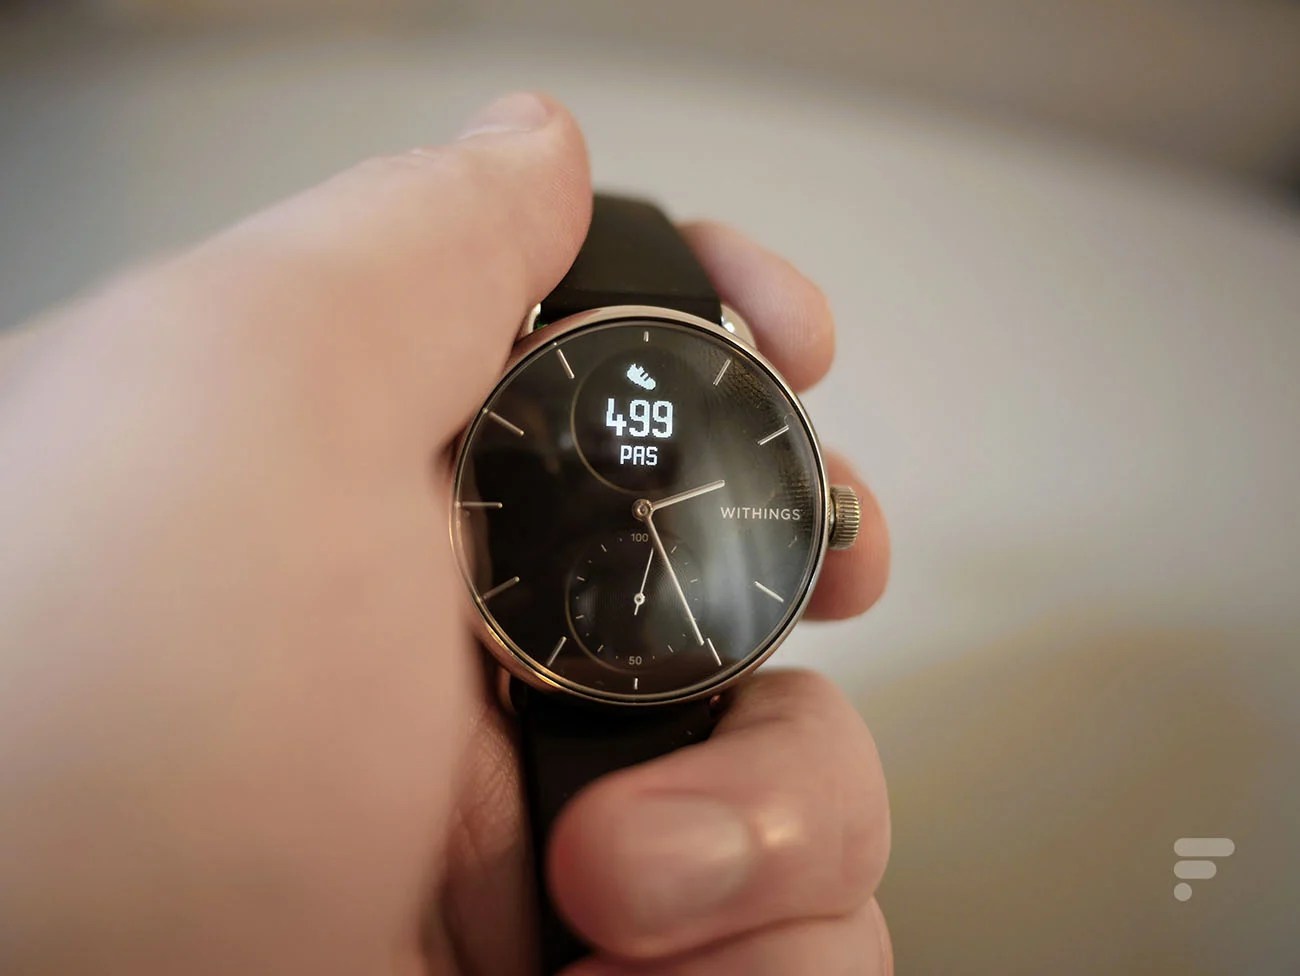 La Withings ScanWatch // Source : Frandroid